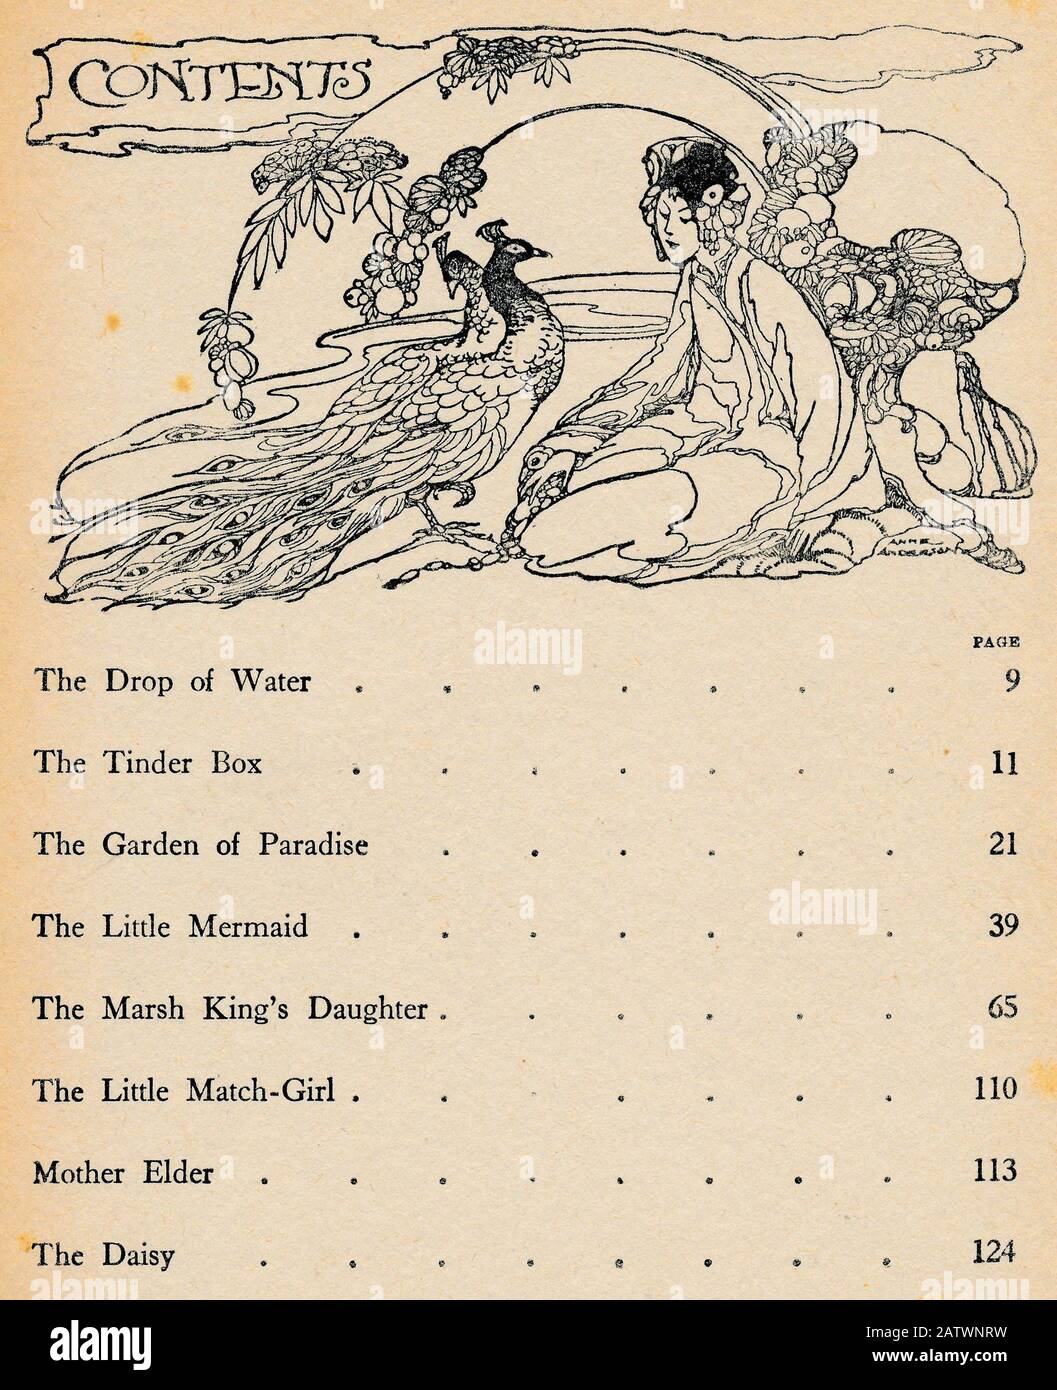 Andersen s fairy stories content  - 1924 - Illustration by Anne Anderson (1874 - 1930) Stock Photo